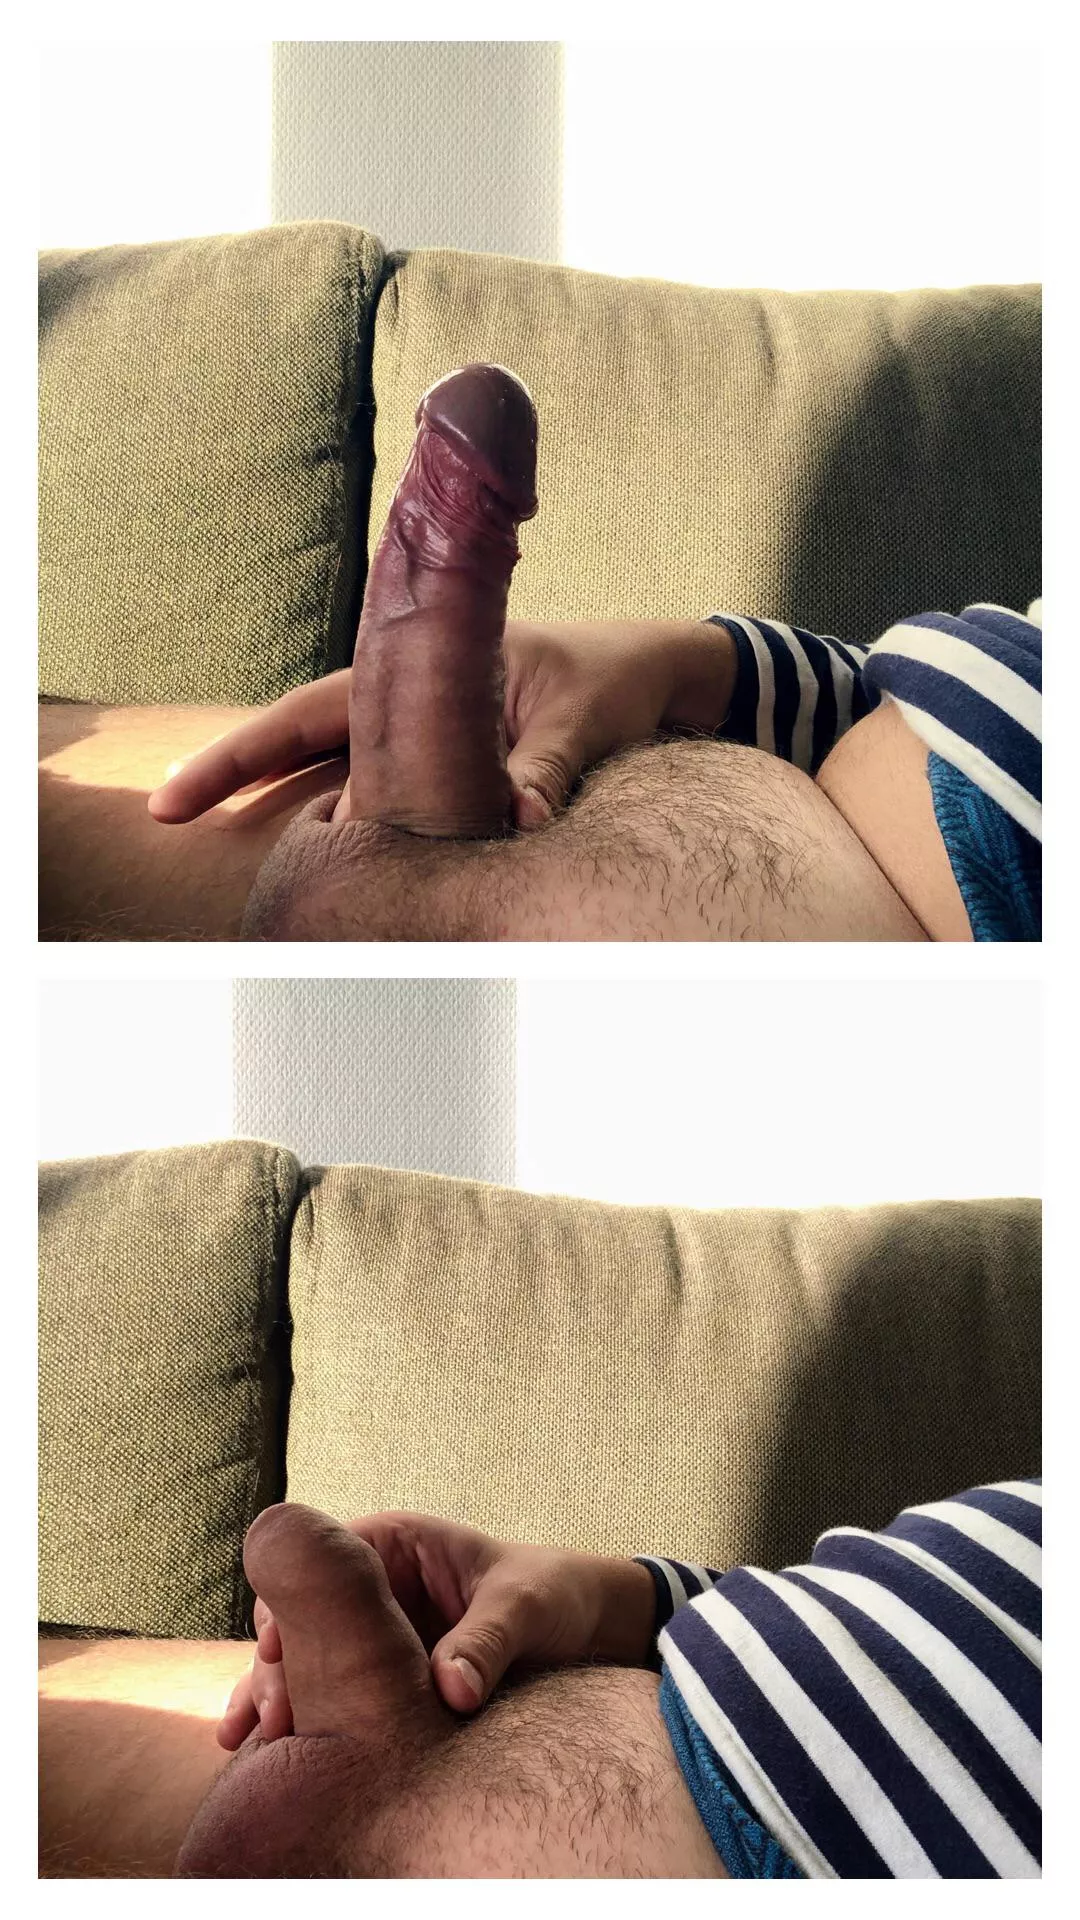 Im so small when flaccid. Luckily my dick grows 😌